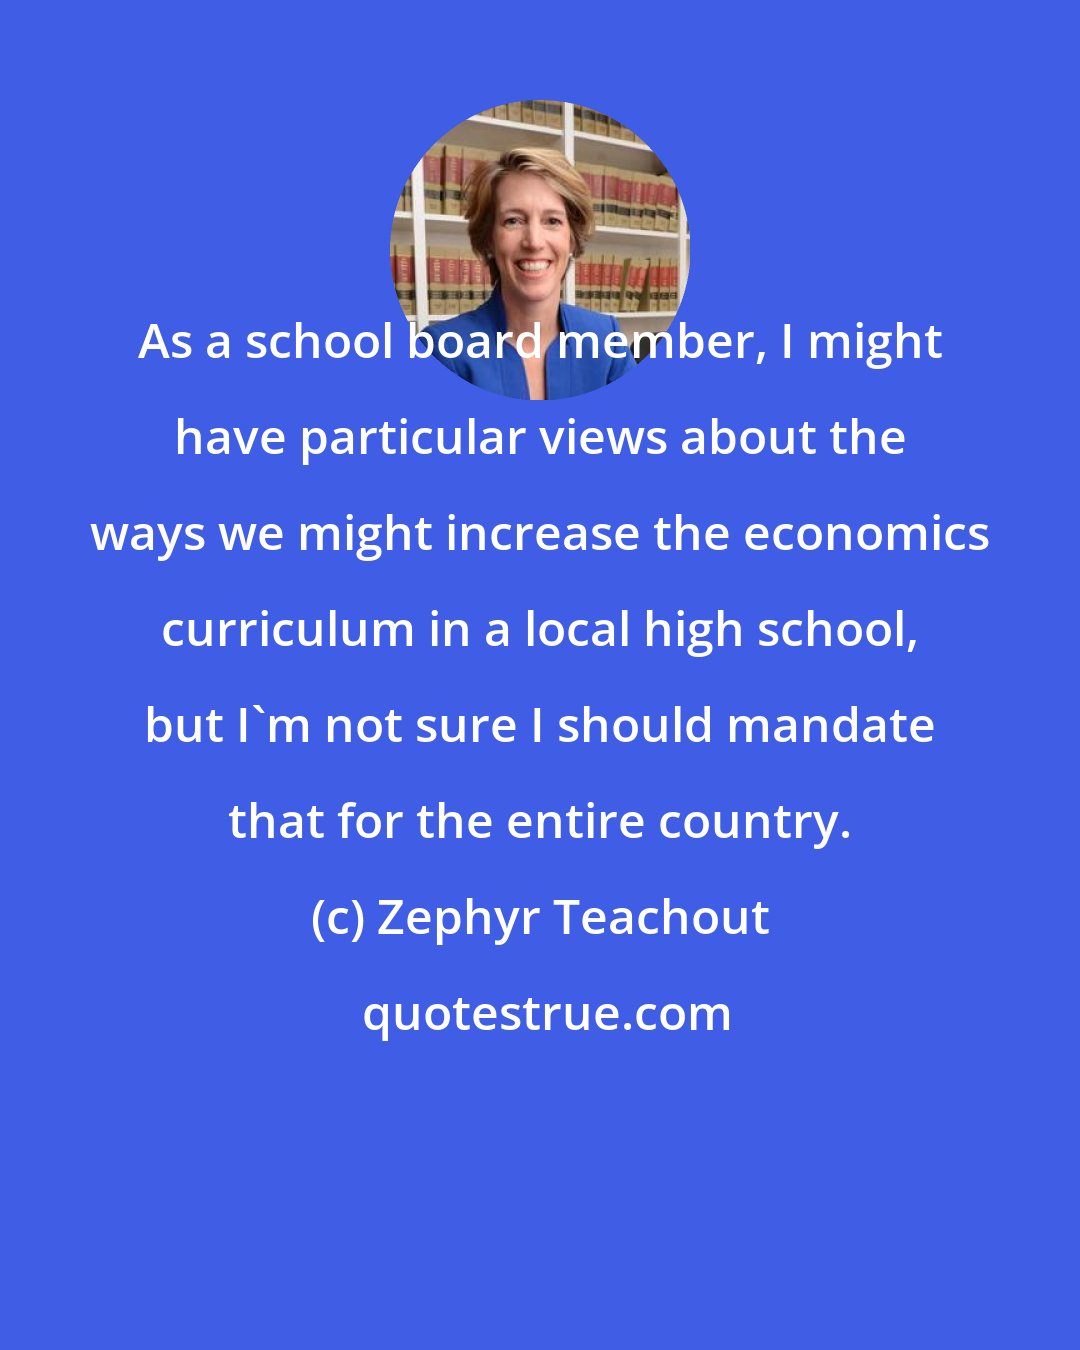 Zephyr Teachout: As a school board member, I might have particular views about the ways we might increase the economics curriculum in a local high school, but I'm not sure I should mandate that for the entire country.